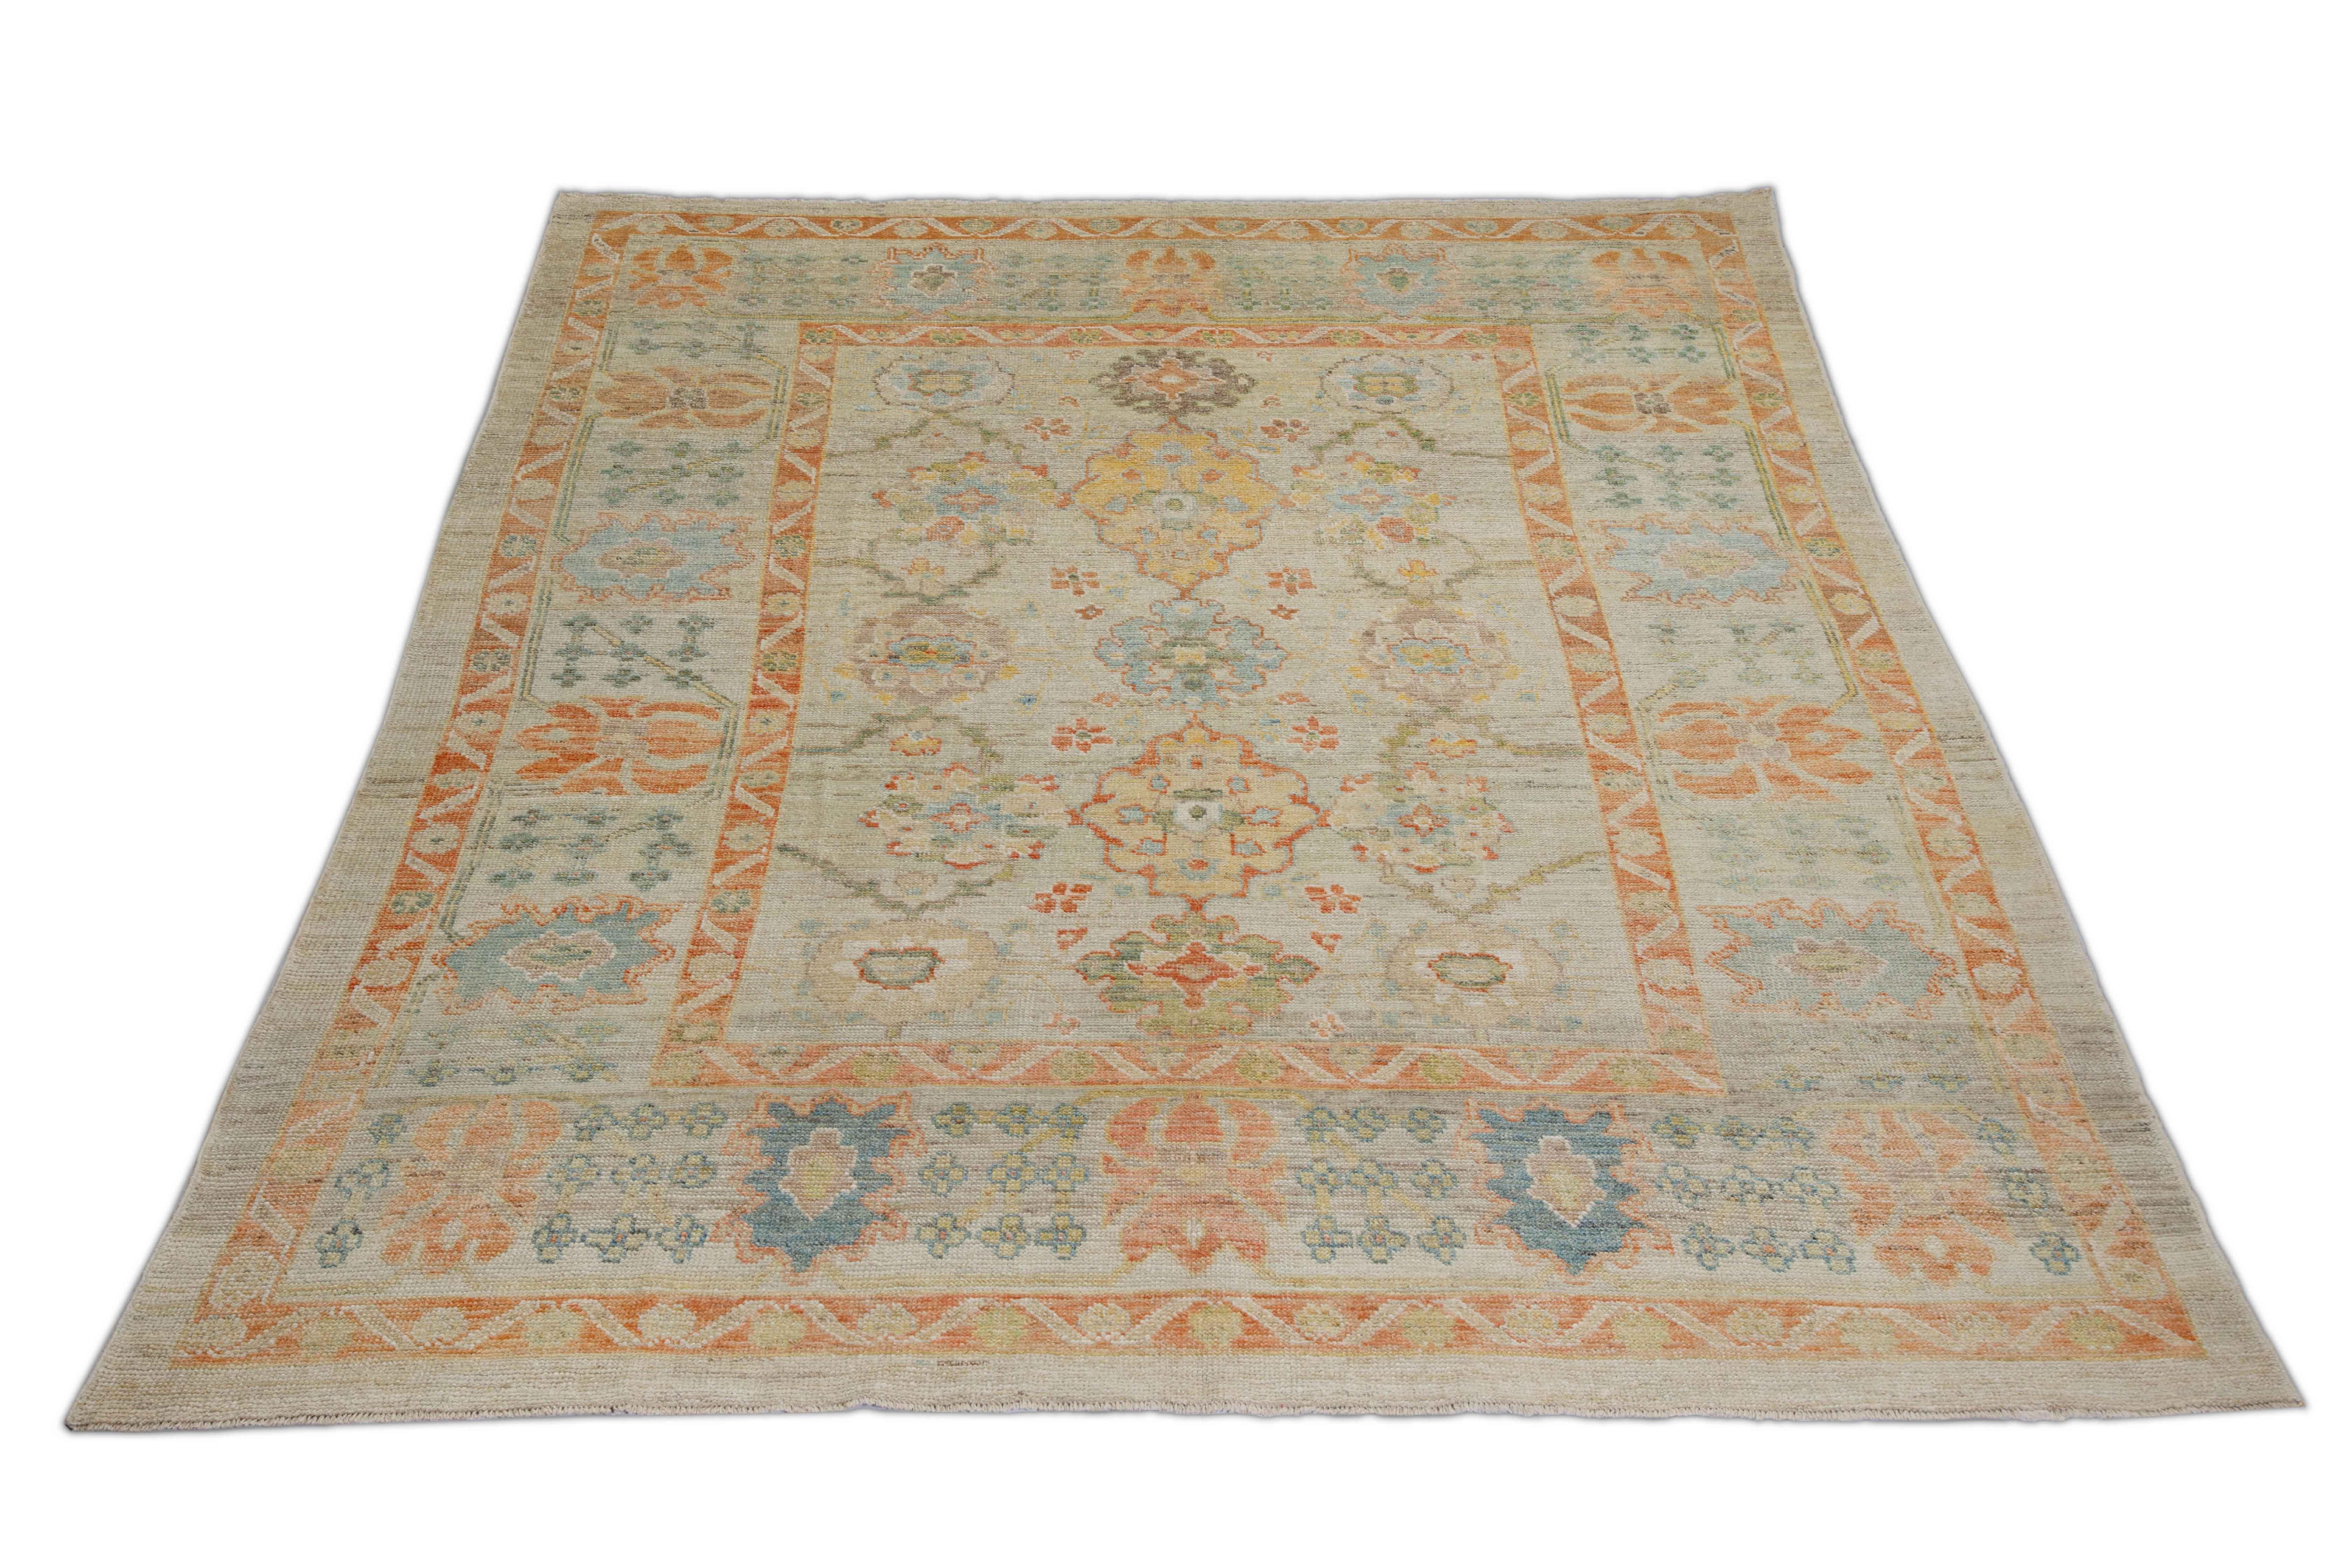 New Turkish rug made of handwoven sheep’s wool of the finest quality. It’s colored with organic vegetable dyes that are certified safe for humans and pets alike. It features a large, beige field with blue and orange flower medallions allover